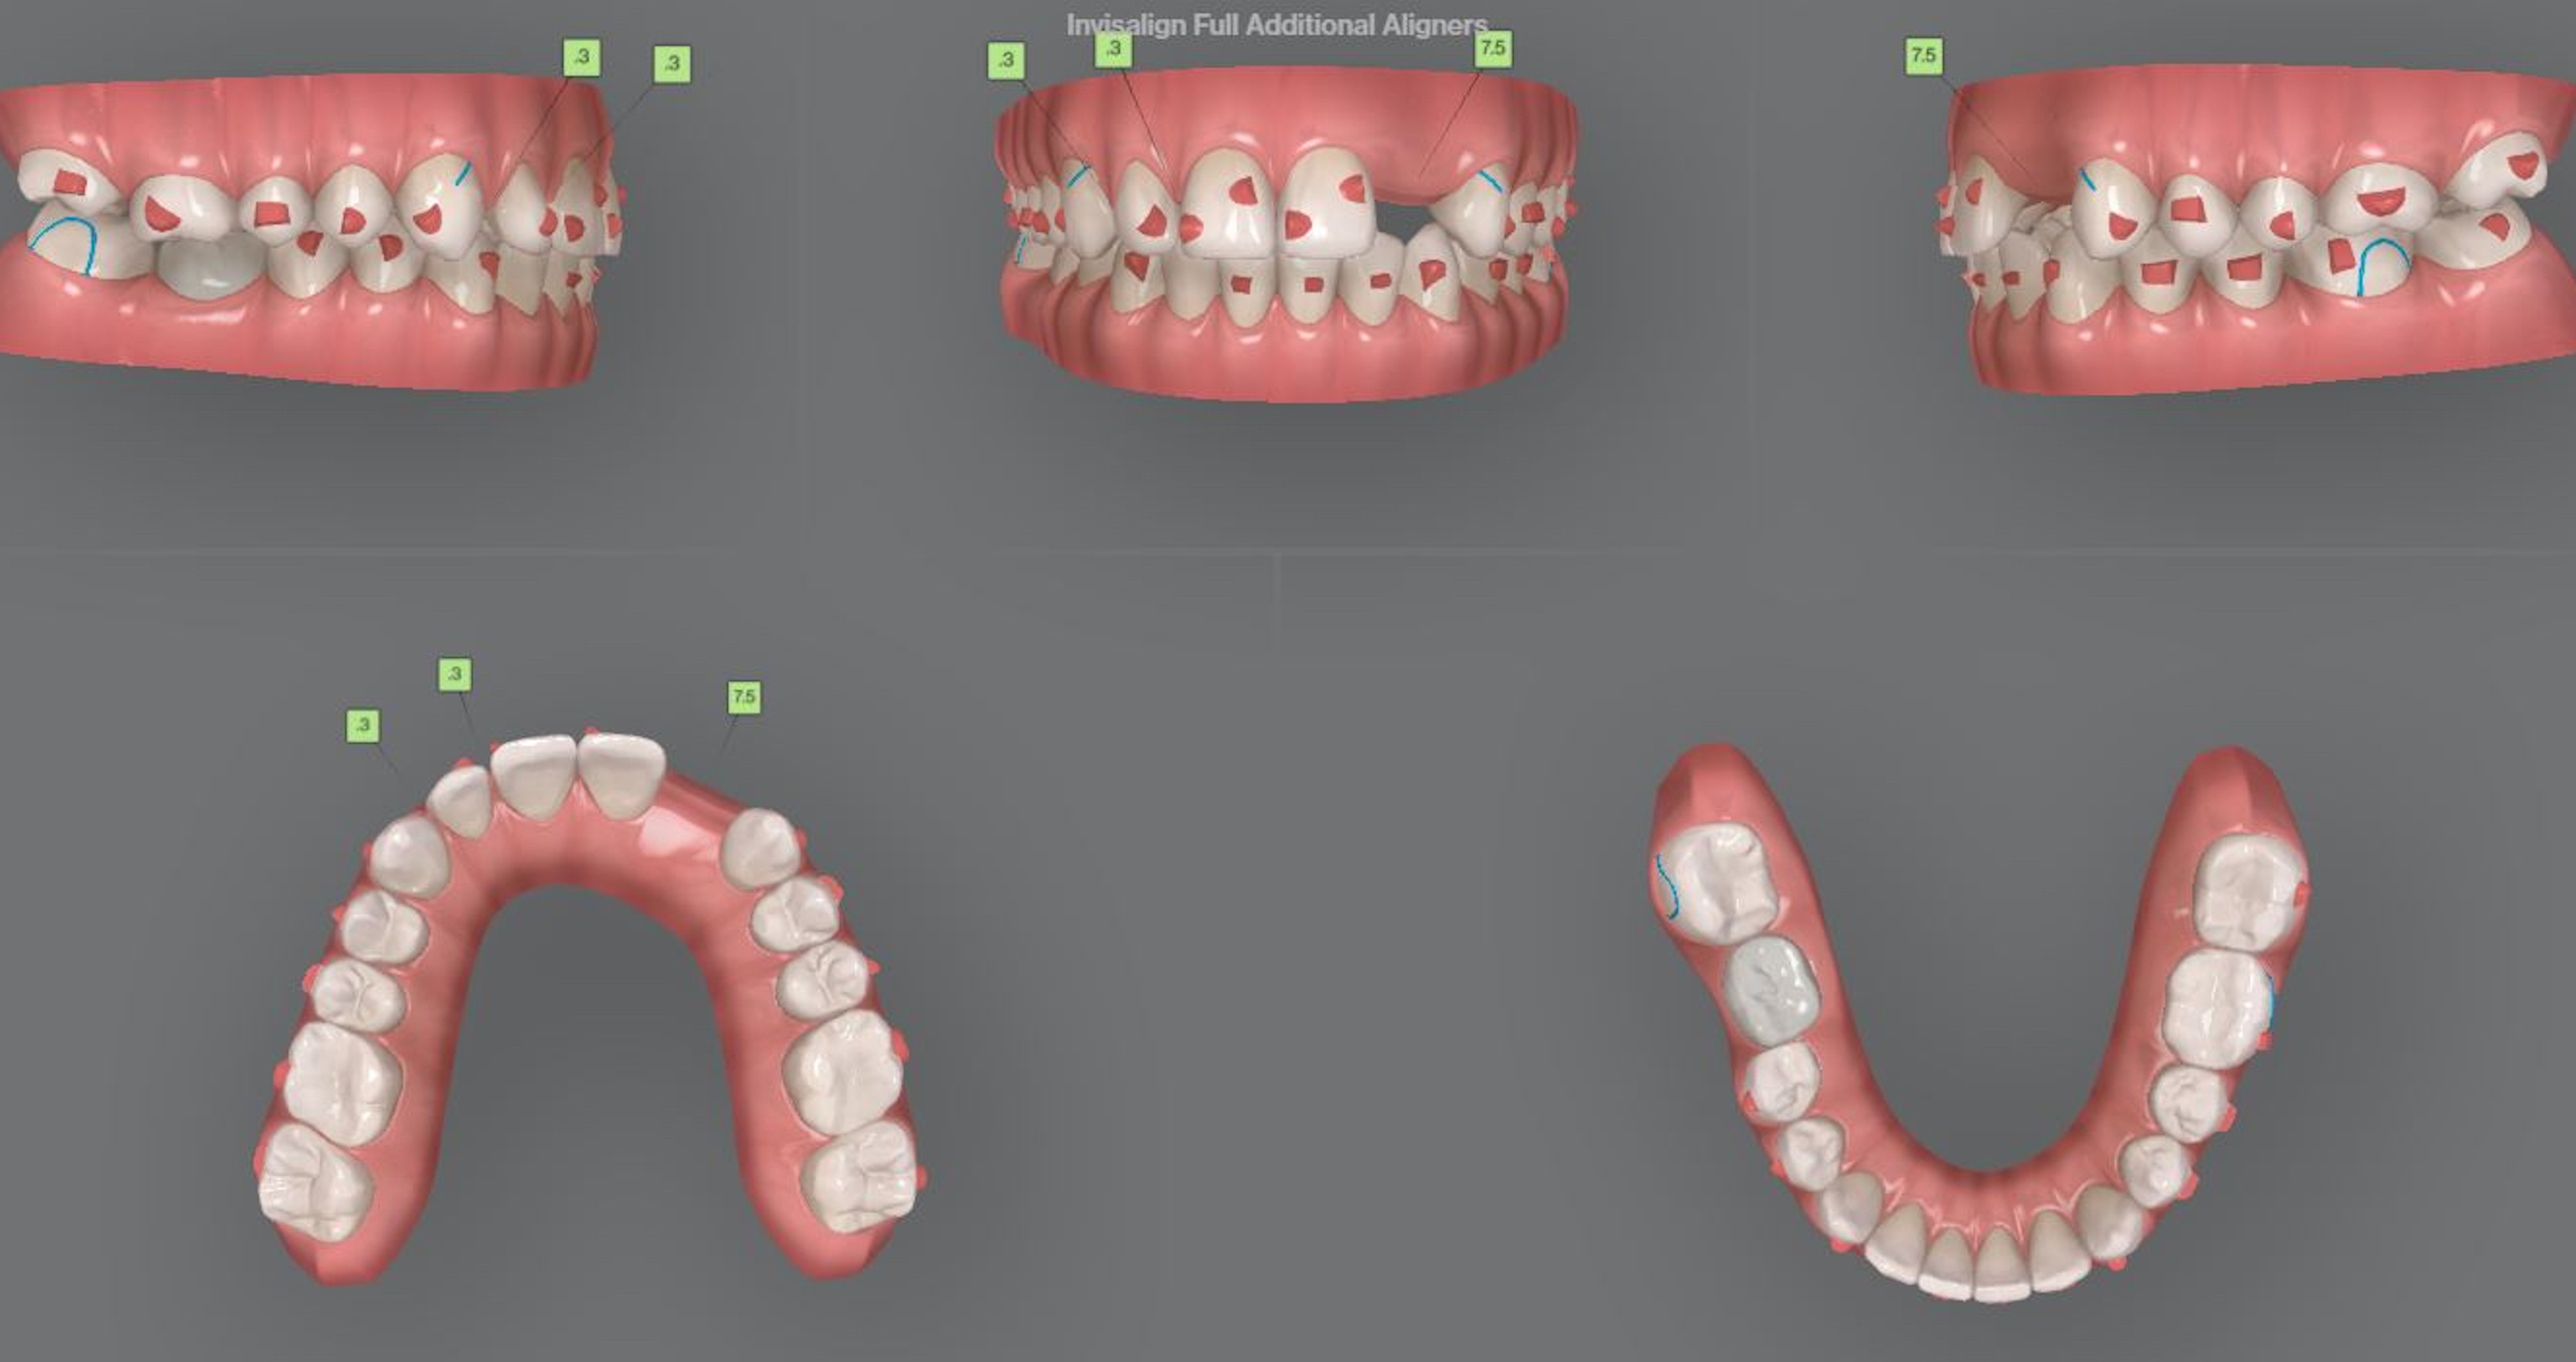 Fig. 8: Additional aligners ordered.